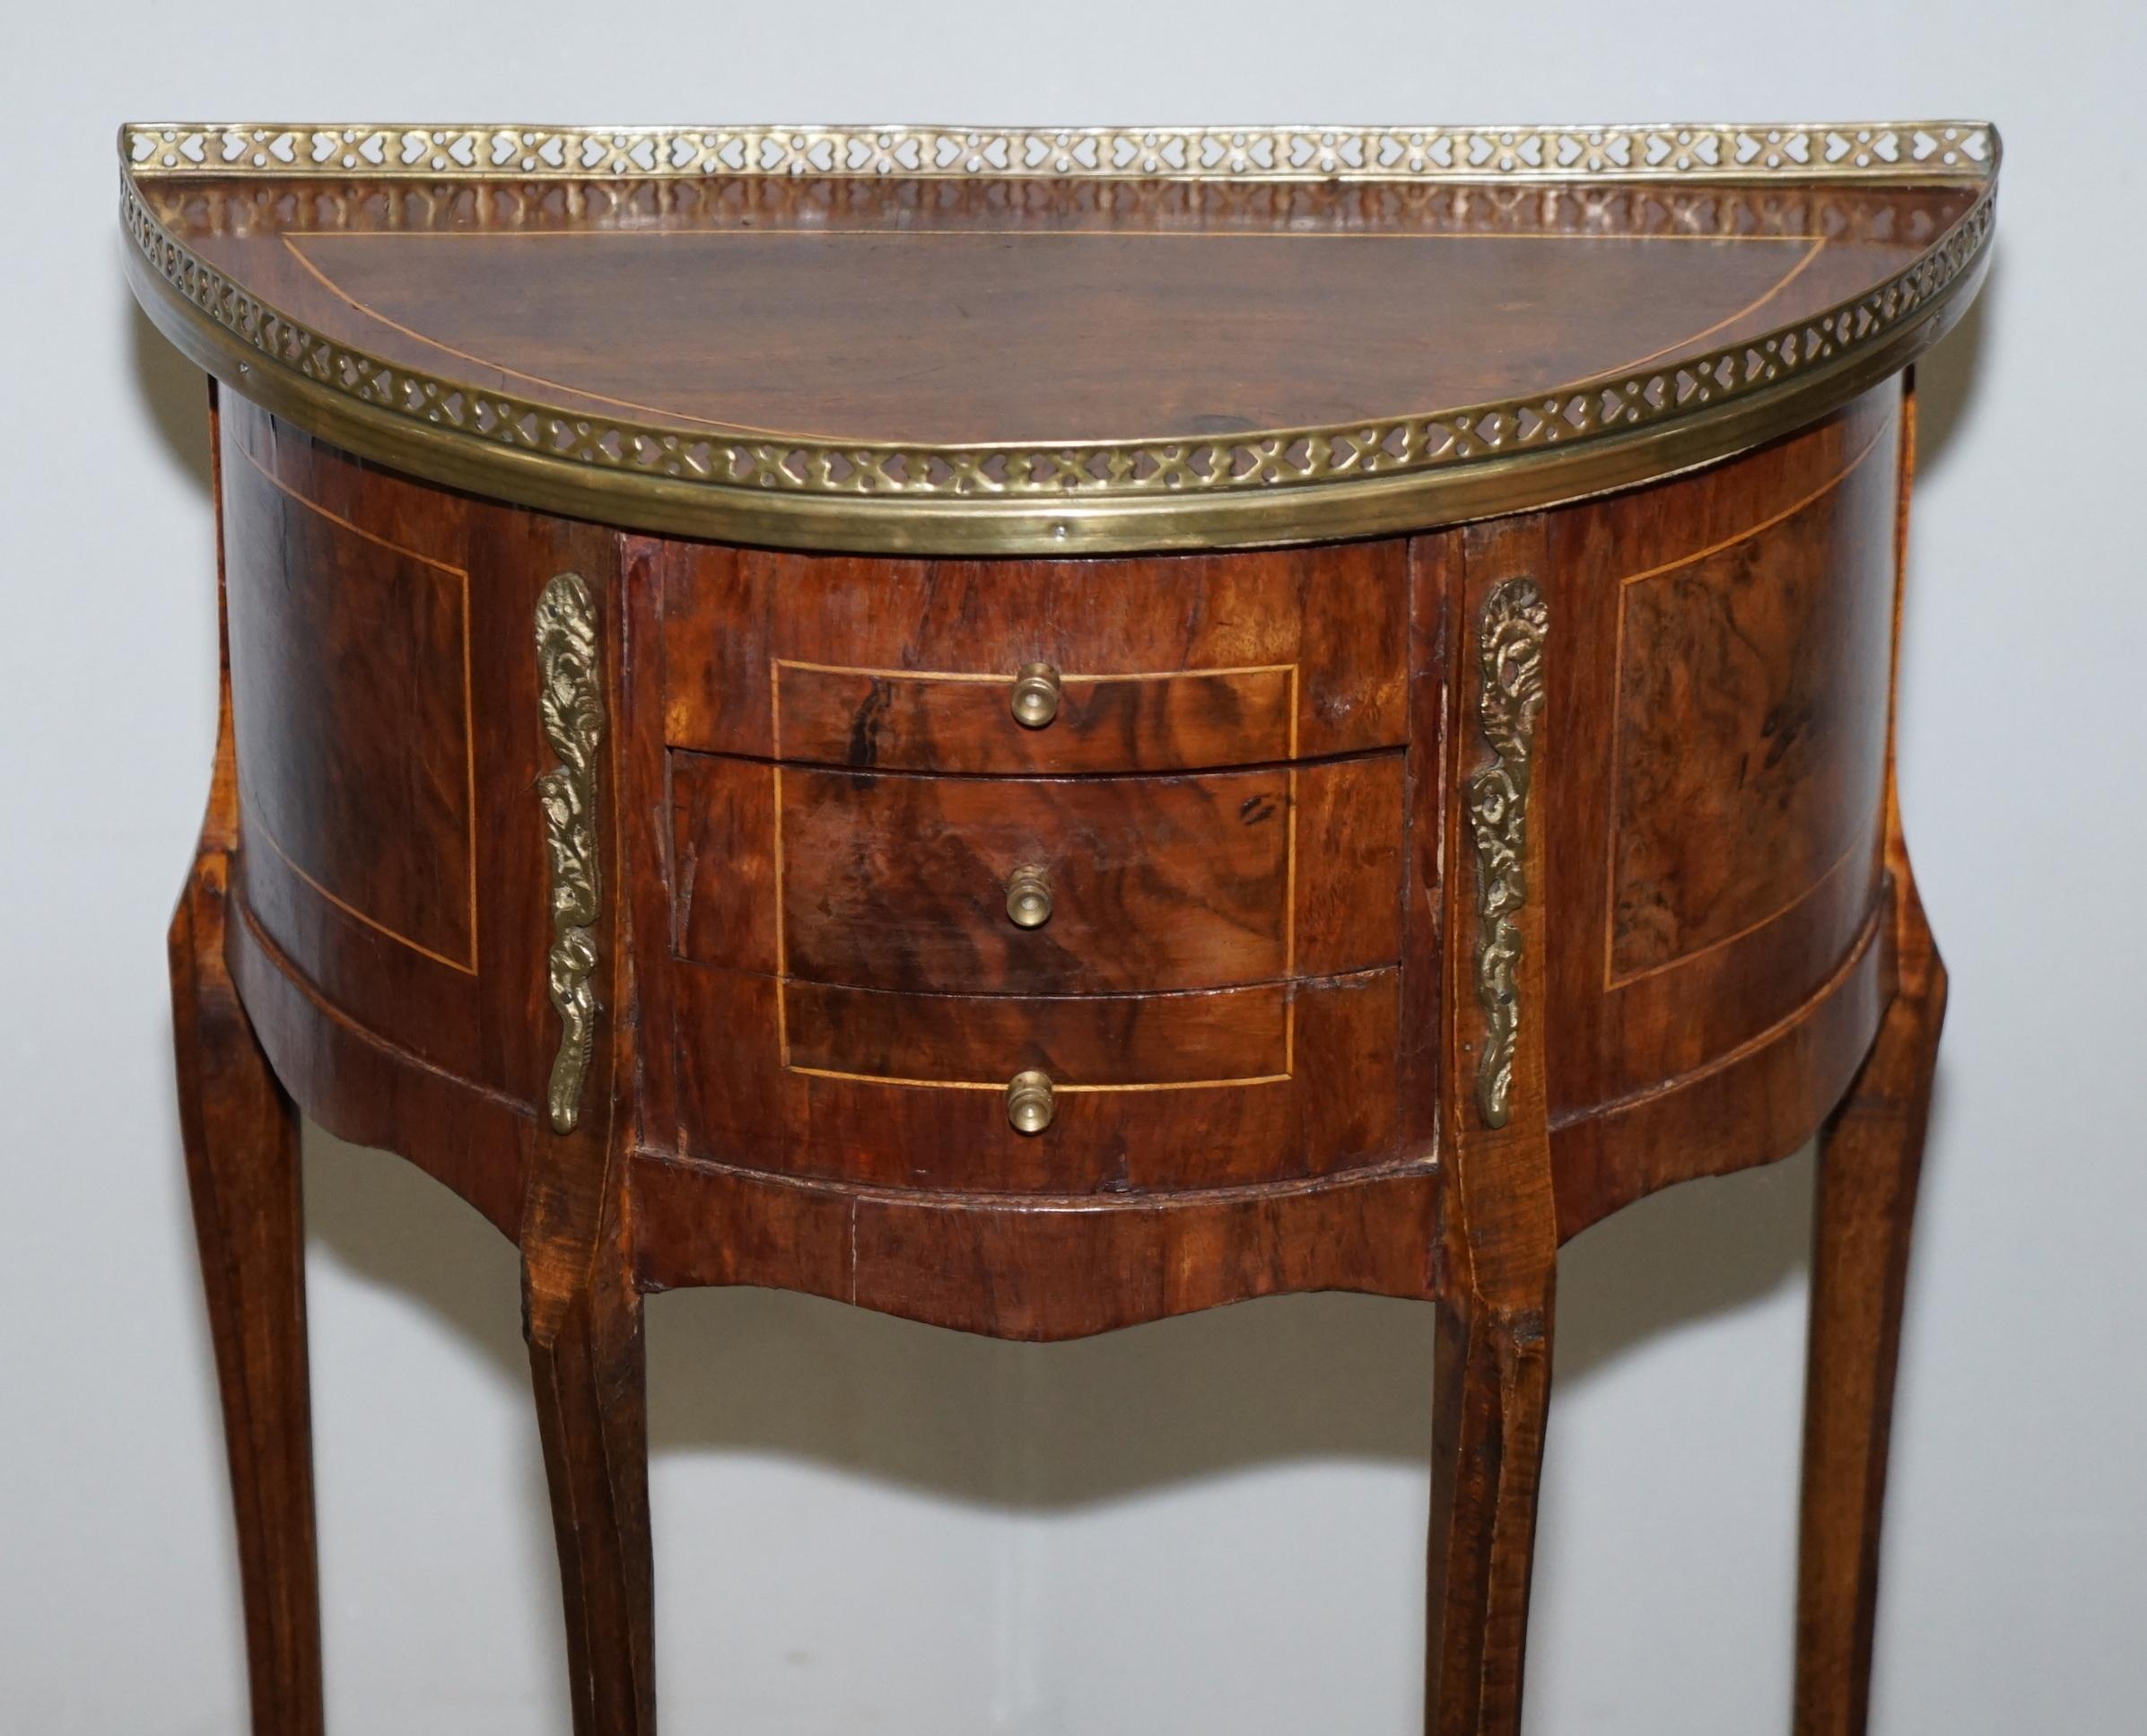 Late Victorian Pair of circa 1900 French Burr Walnut Brass Gallery Rail Demilune Side Tables